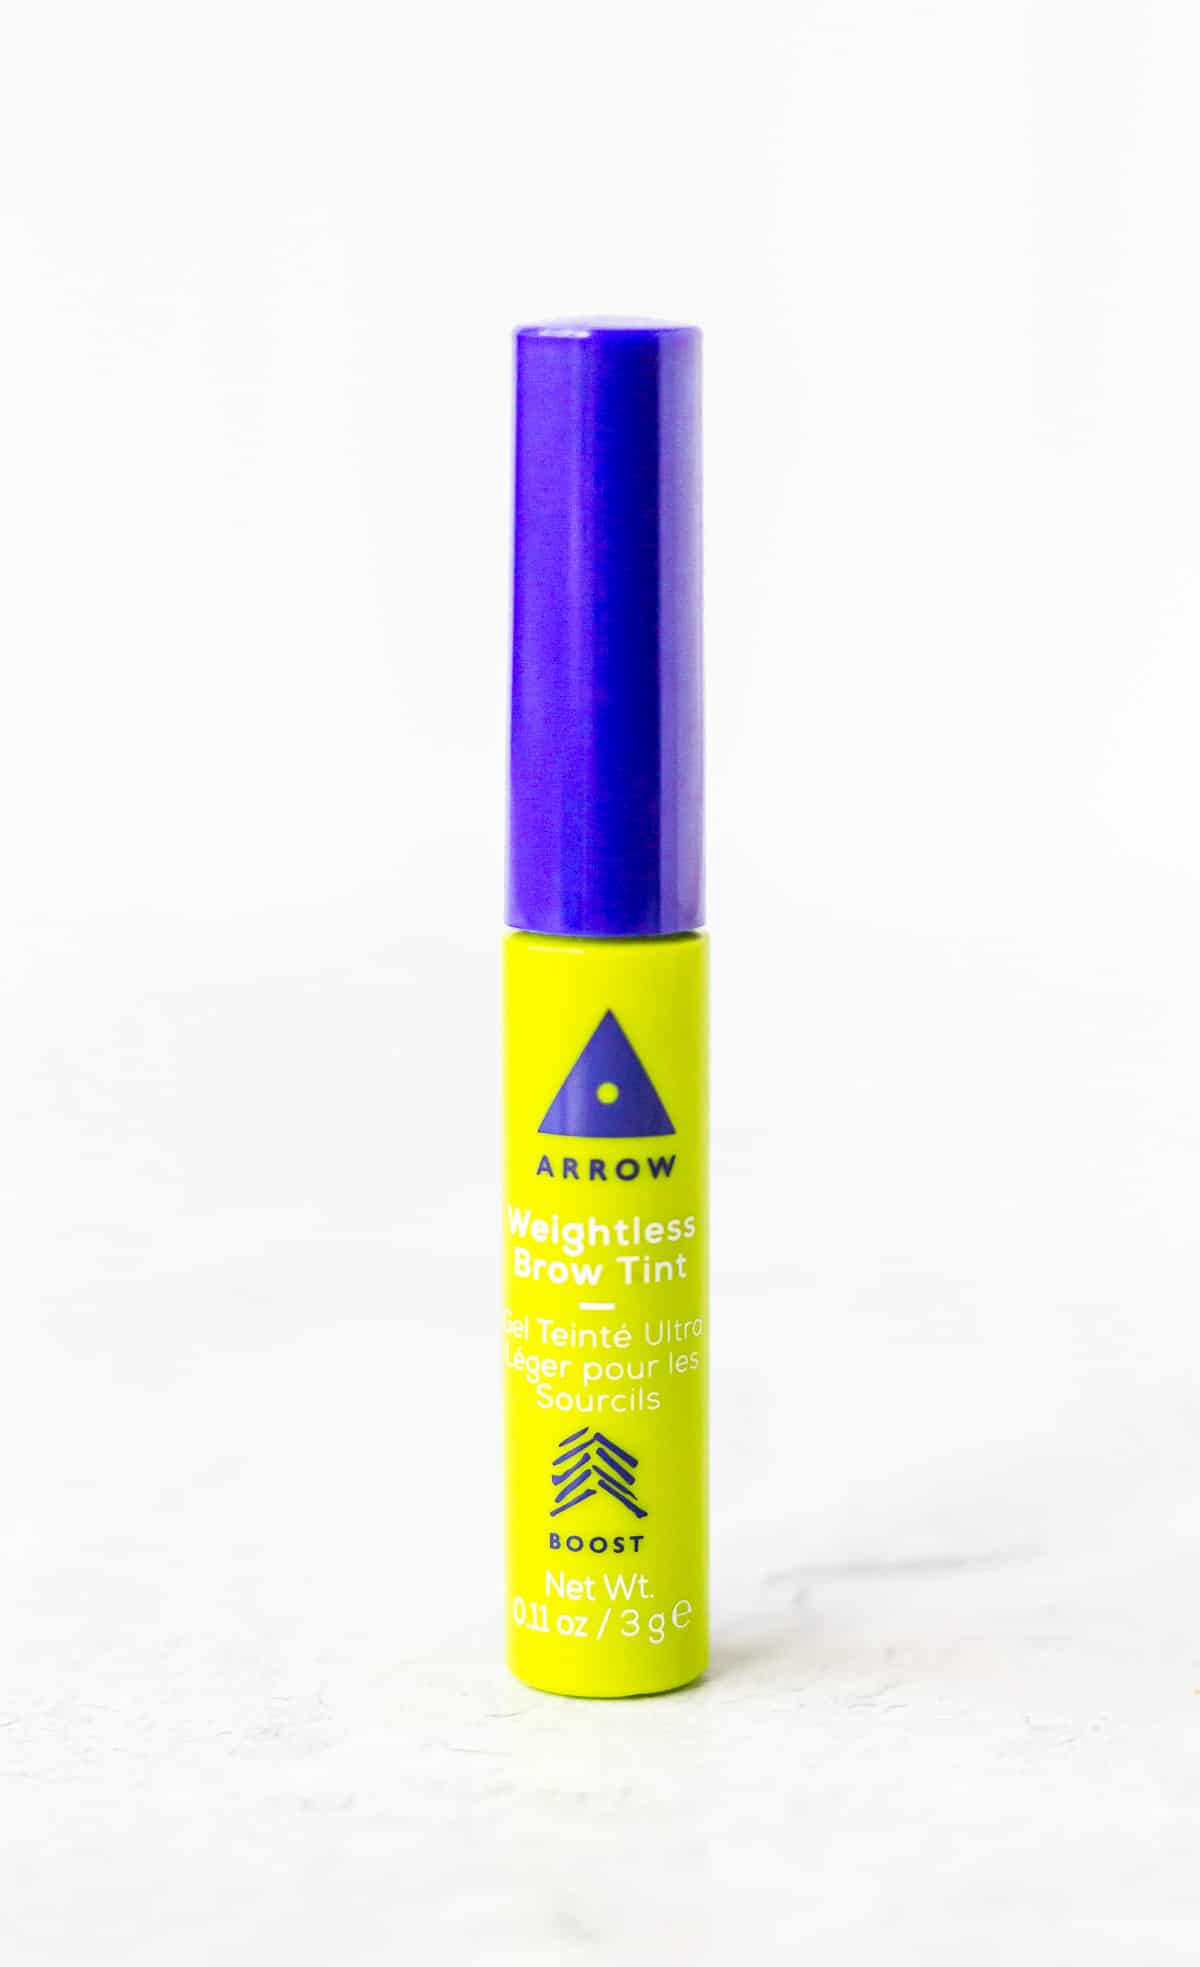 Arrow Weightless Brow Tint on a white background